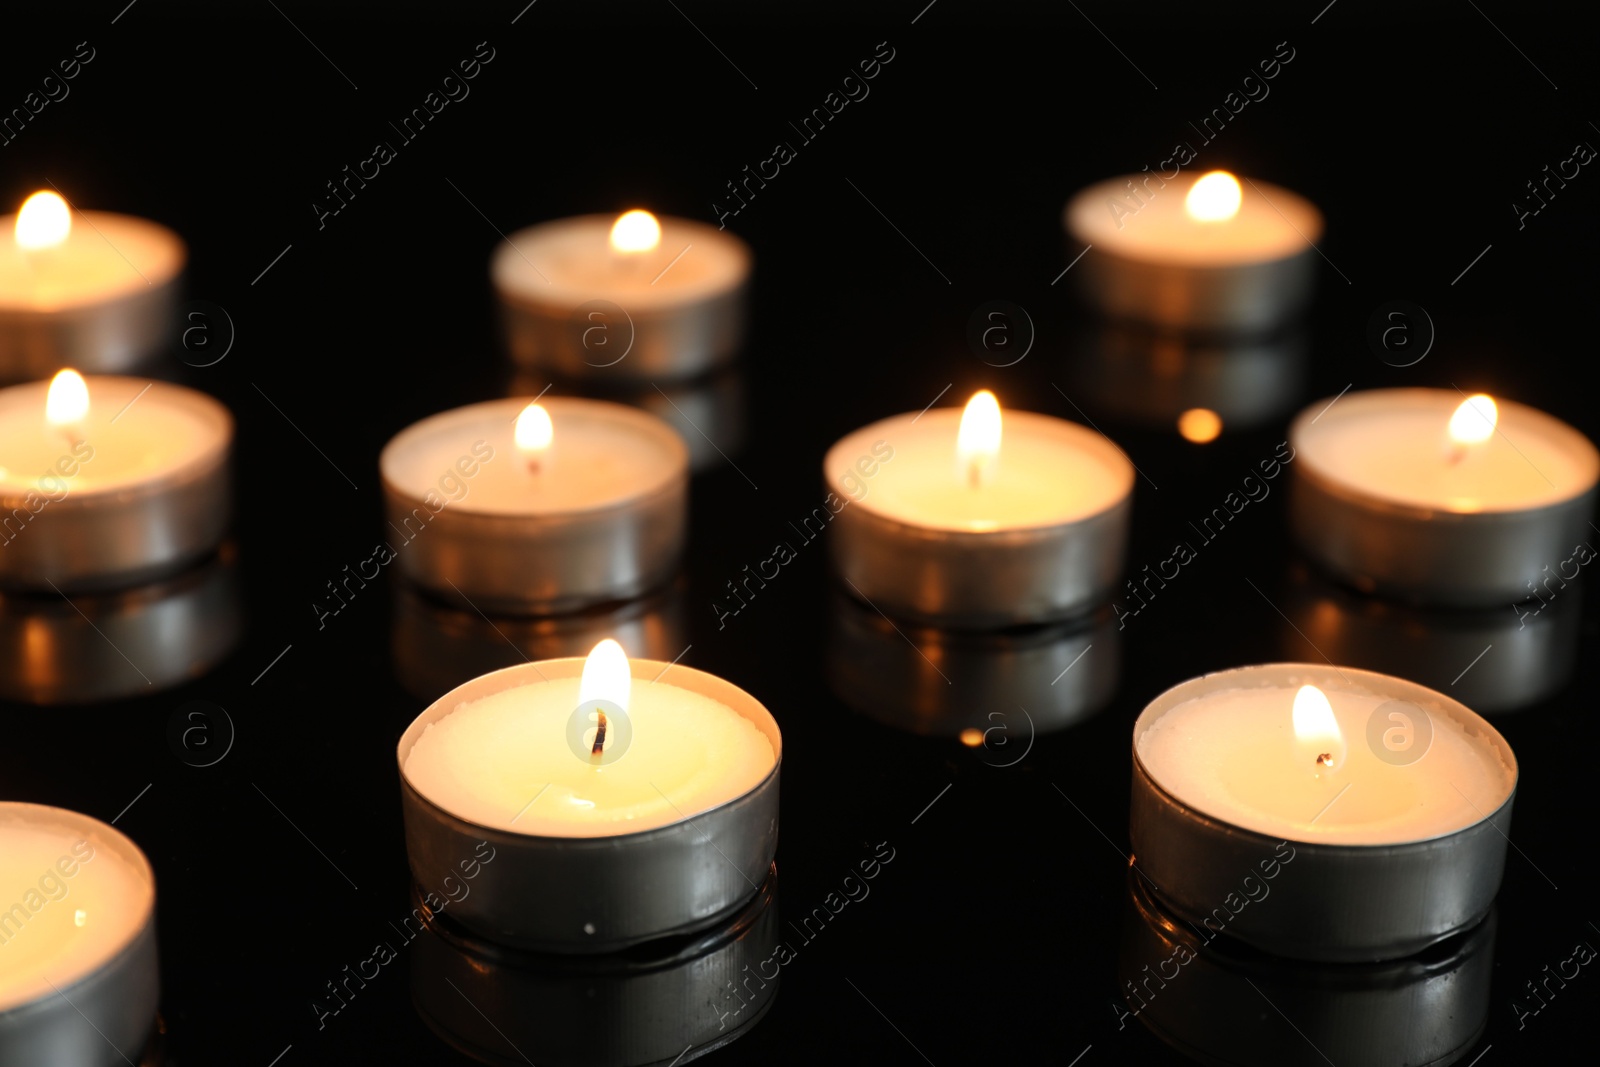 Photo of Many burning tealight candles on mirror surface against black background